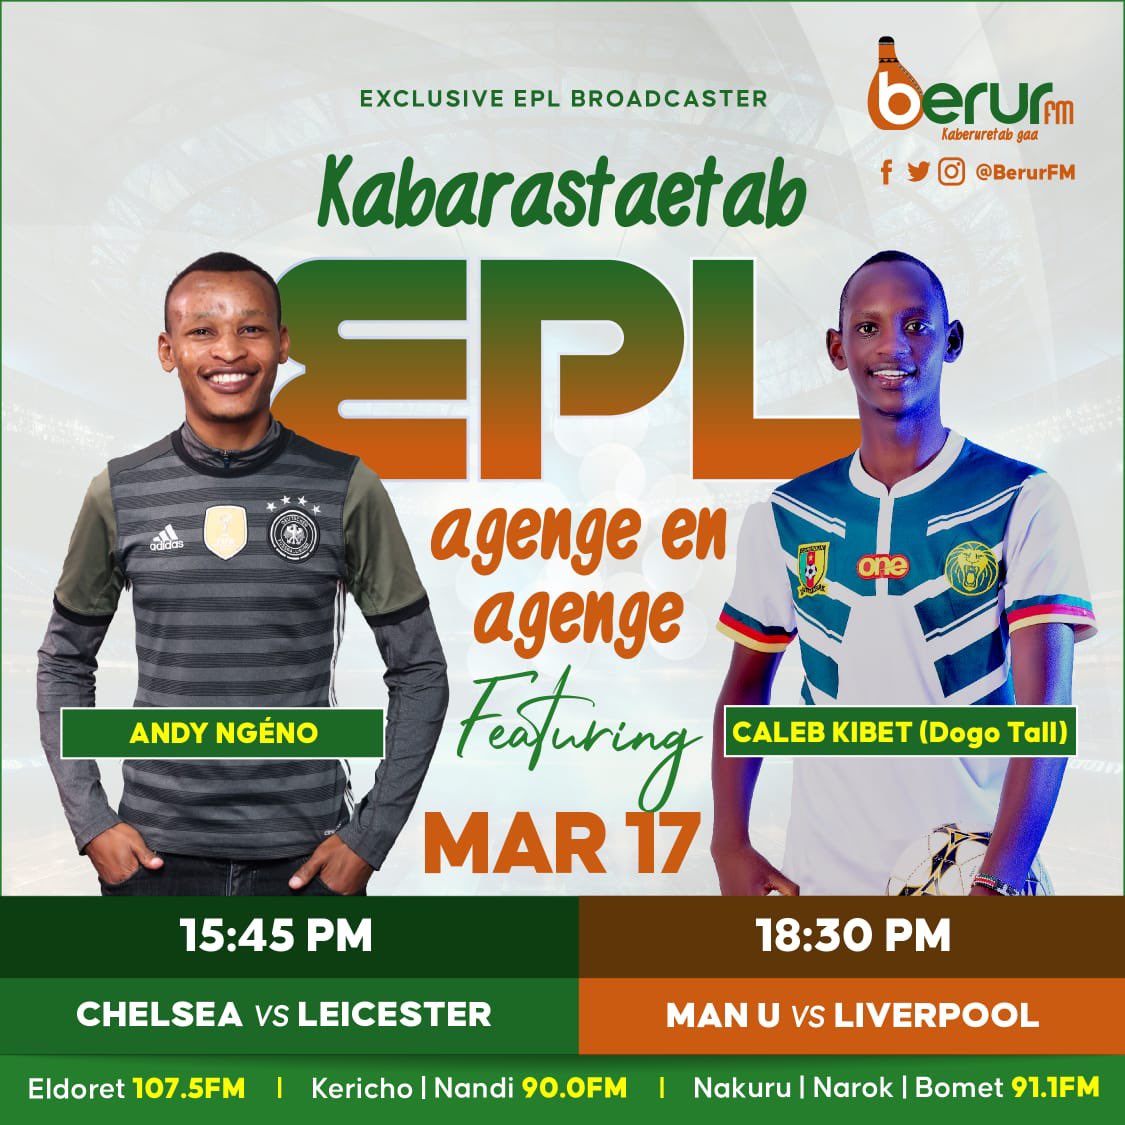 Football fans, Panganat weekend which game are you waiting for this weekend? #BerurFm #EPLwithBerur